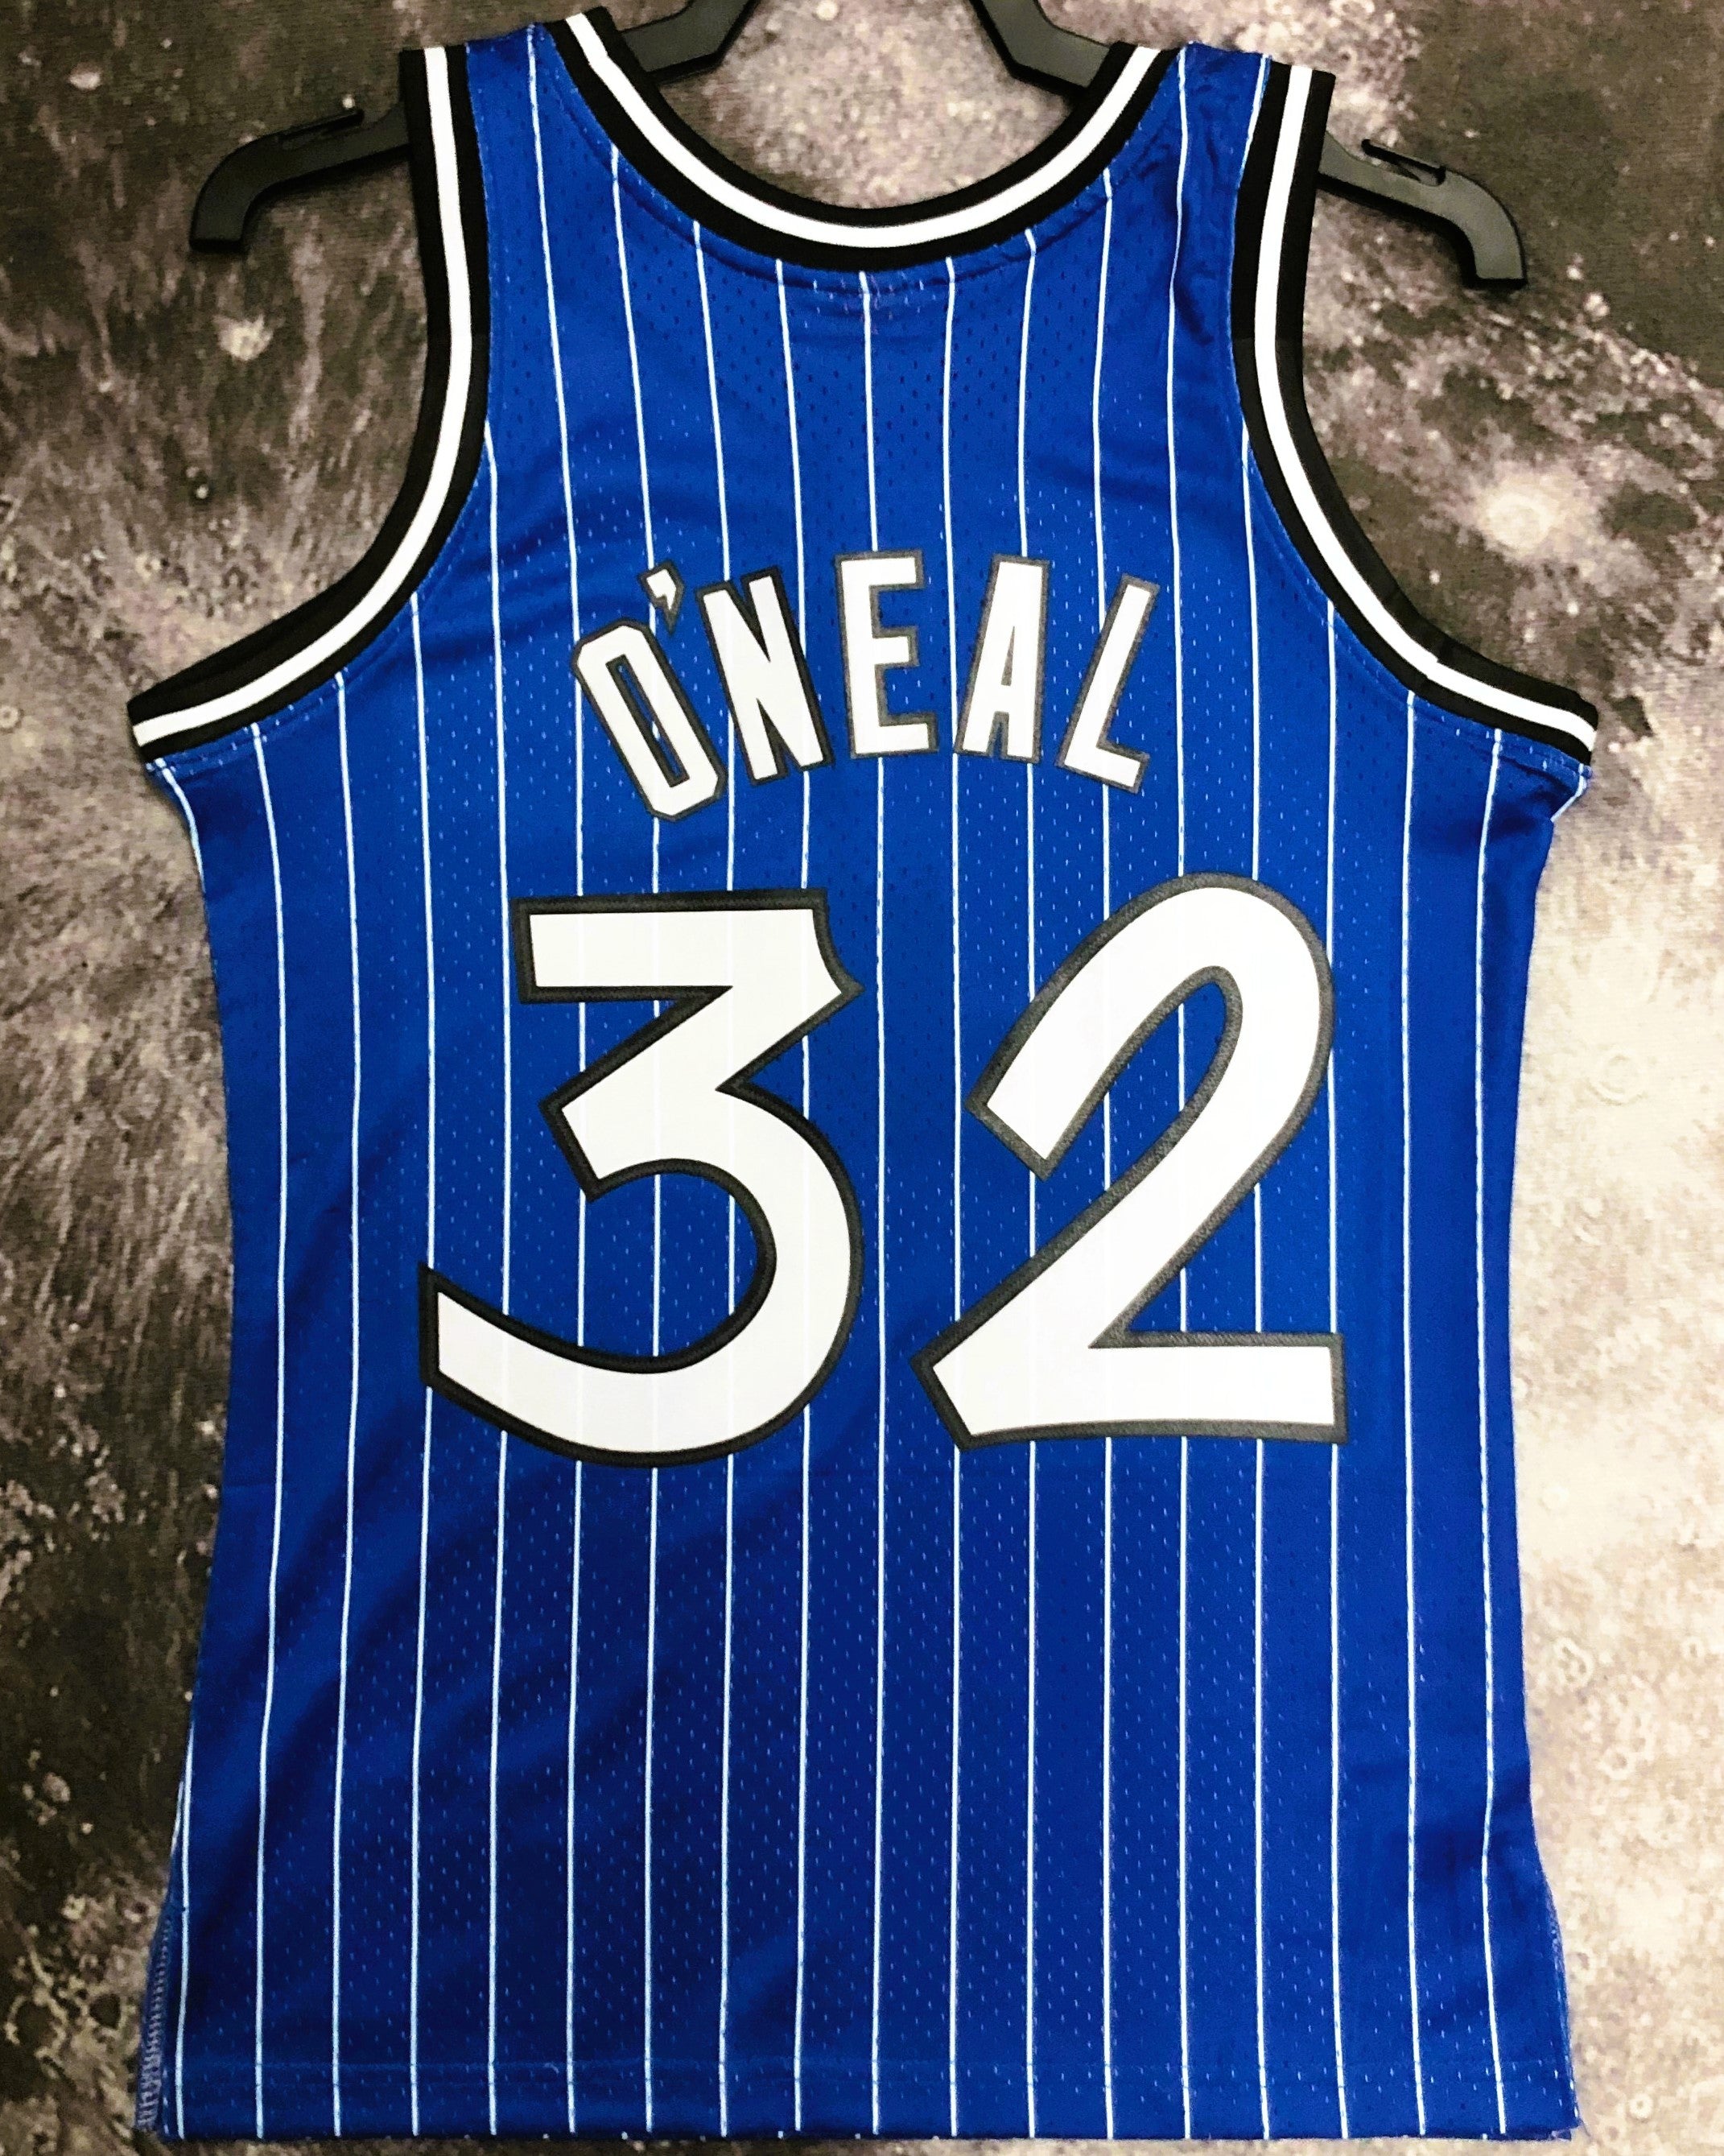 O'NEAL SHAQUILLE (Orl)